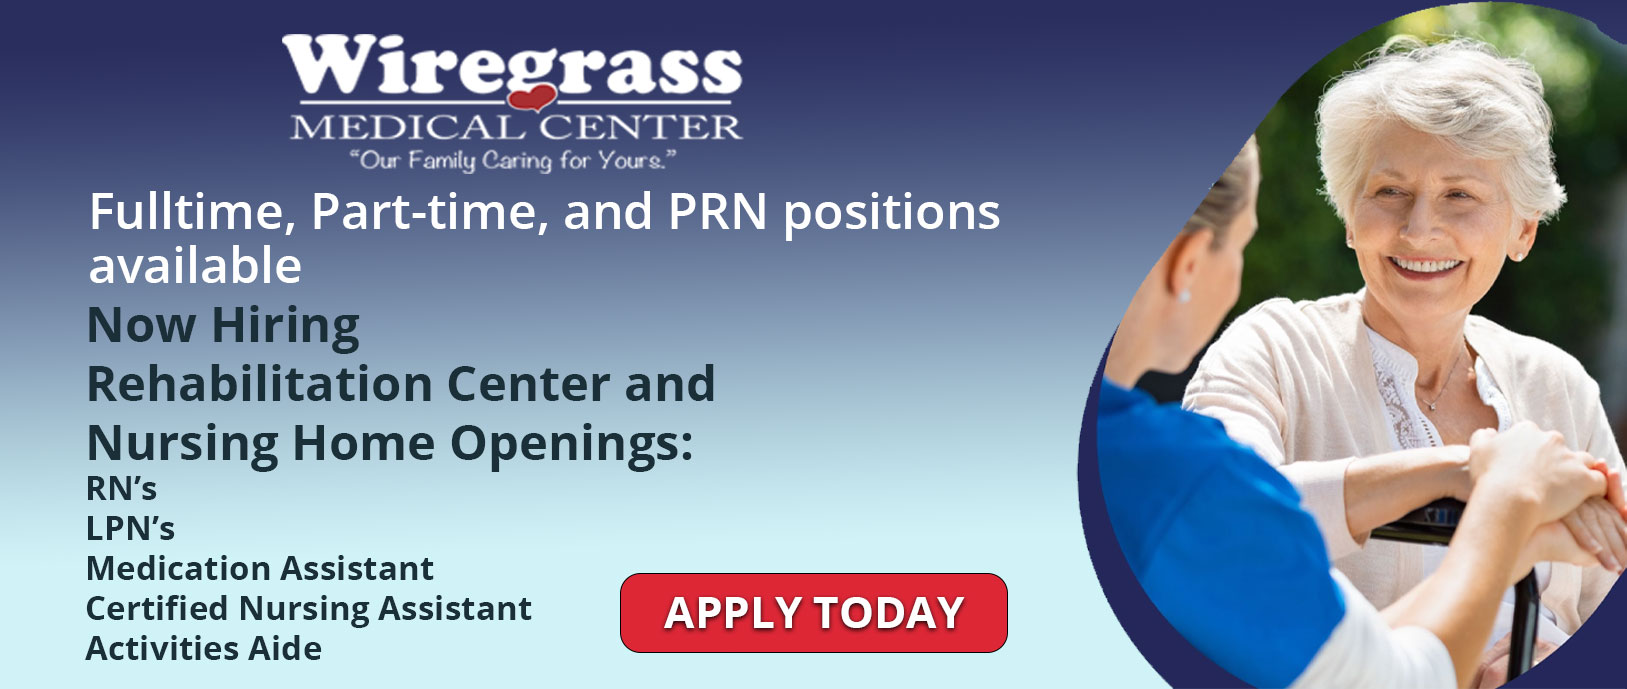 Full-Time, Part-Time, and PRN positions available 
Now Hiring
Rehabilitation Center and Nursing Home Openings:

RN's
LPN's
Medication Assistant
Certified Nursing Assistant
Activities Aide

(APPLY TODAY)